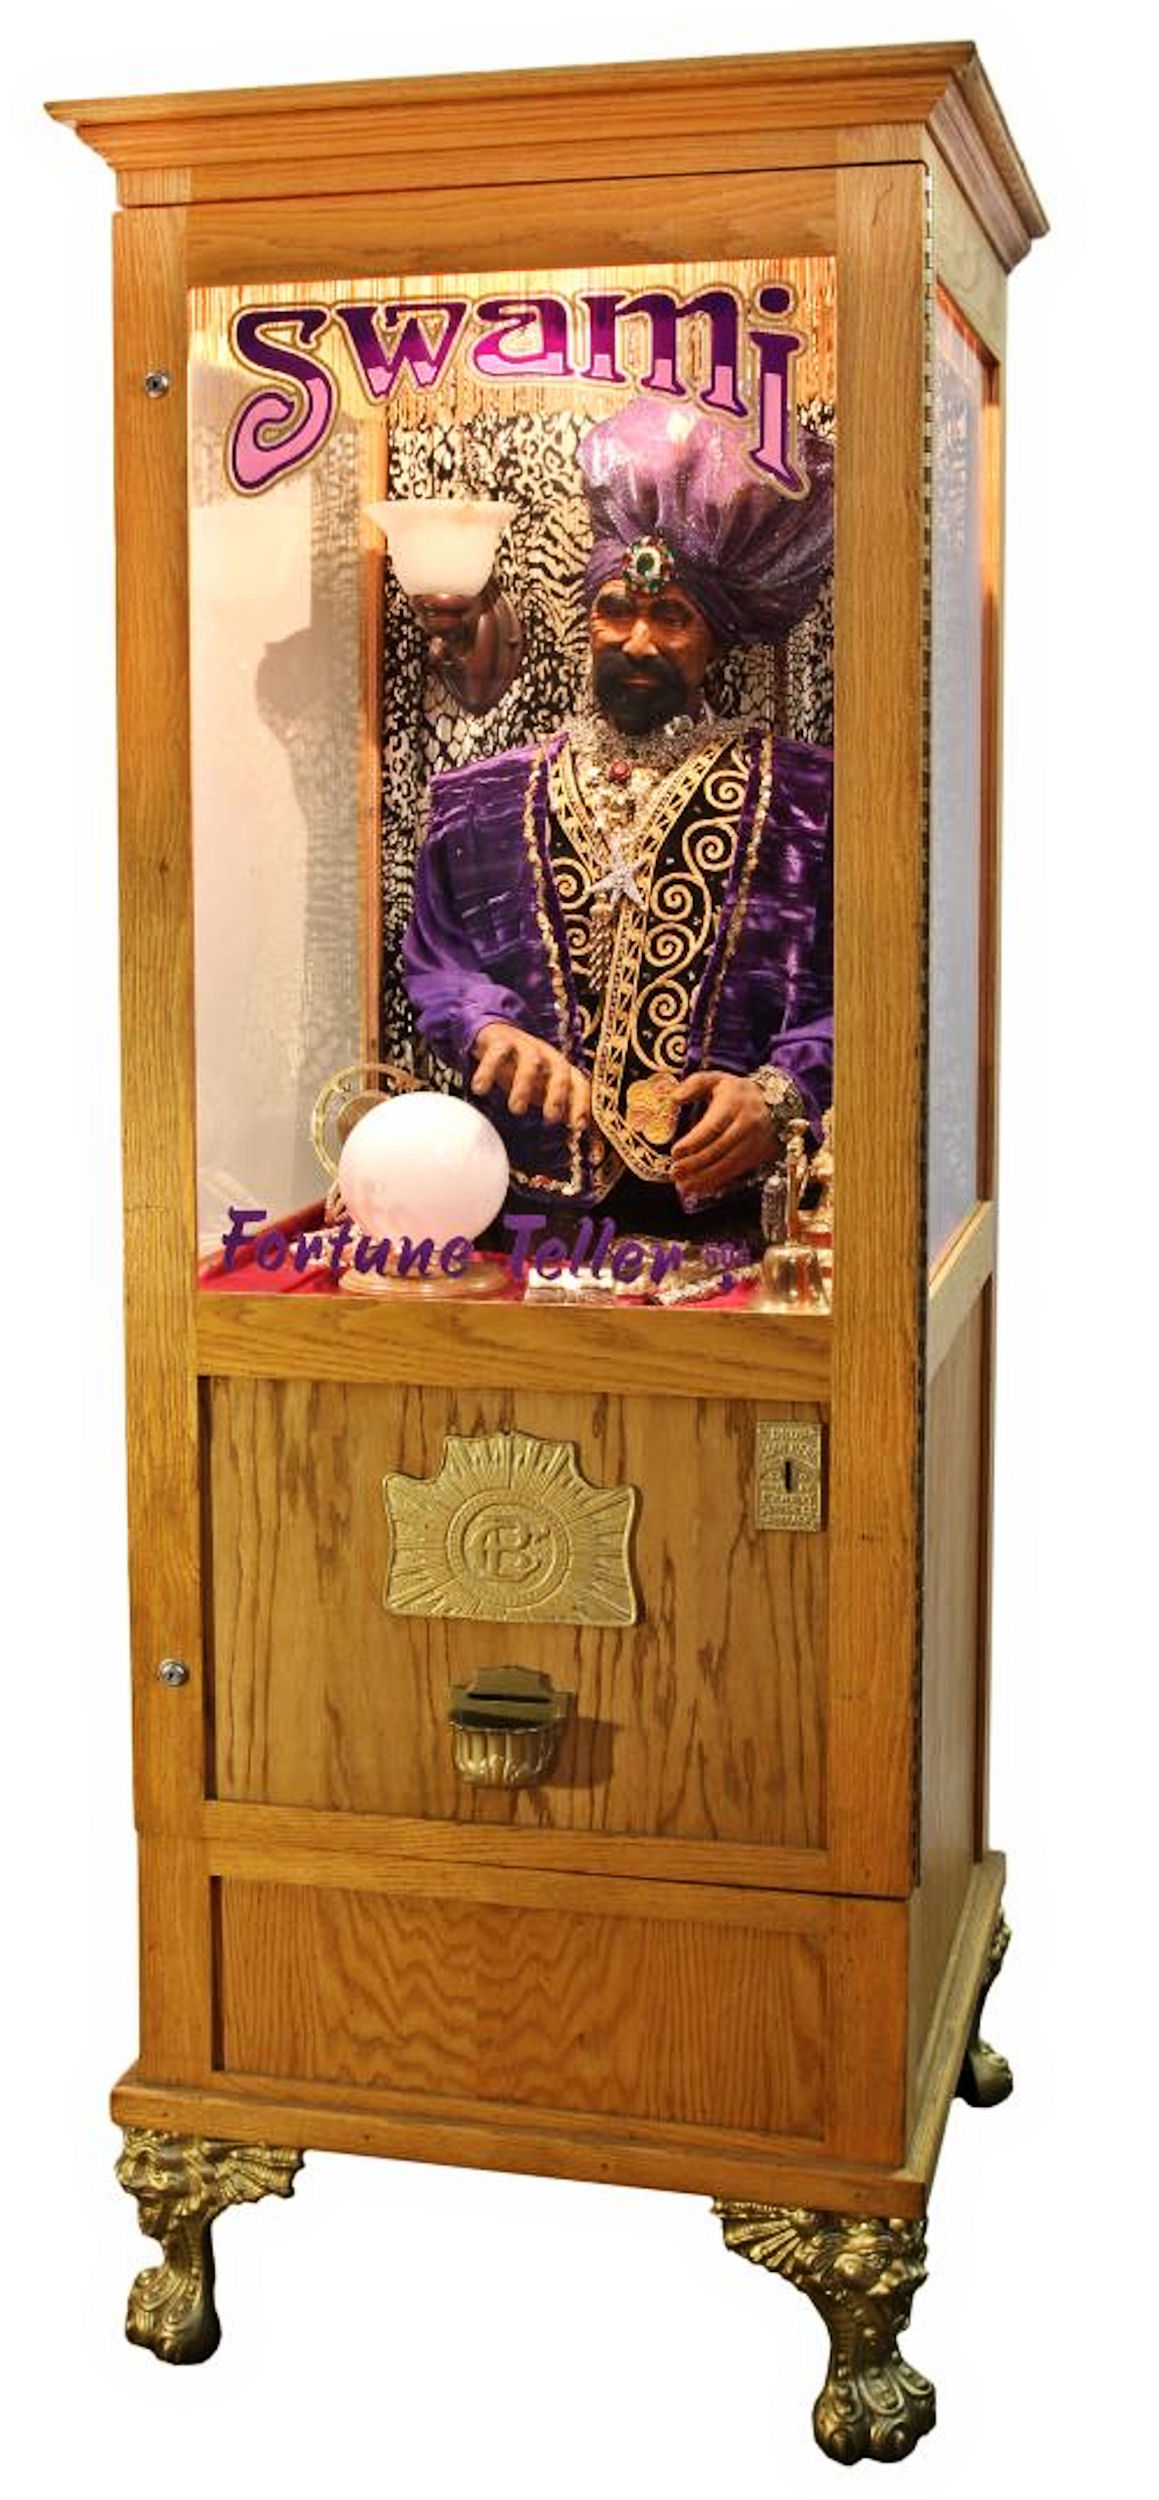 Operating Swami 50 cent Fortune Telling Machine